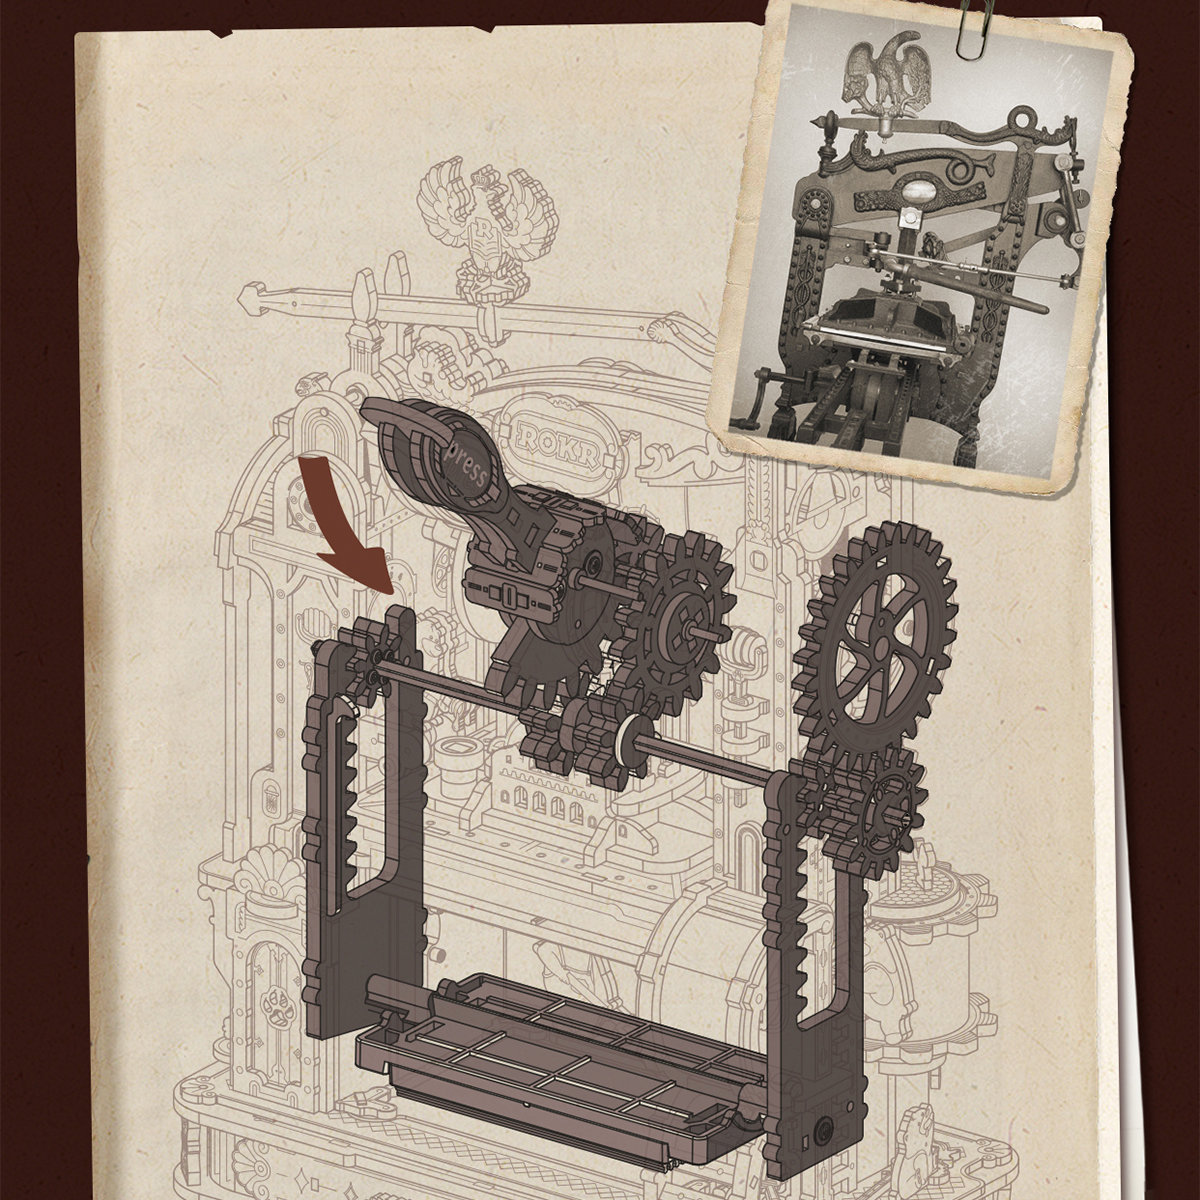 📜New Arrival📜 Step Back in Time with ROKR Classic Printing Press